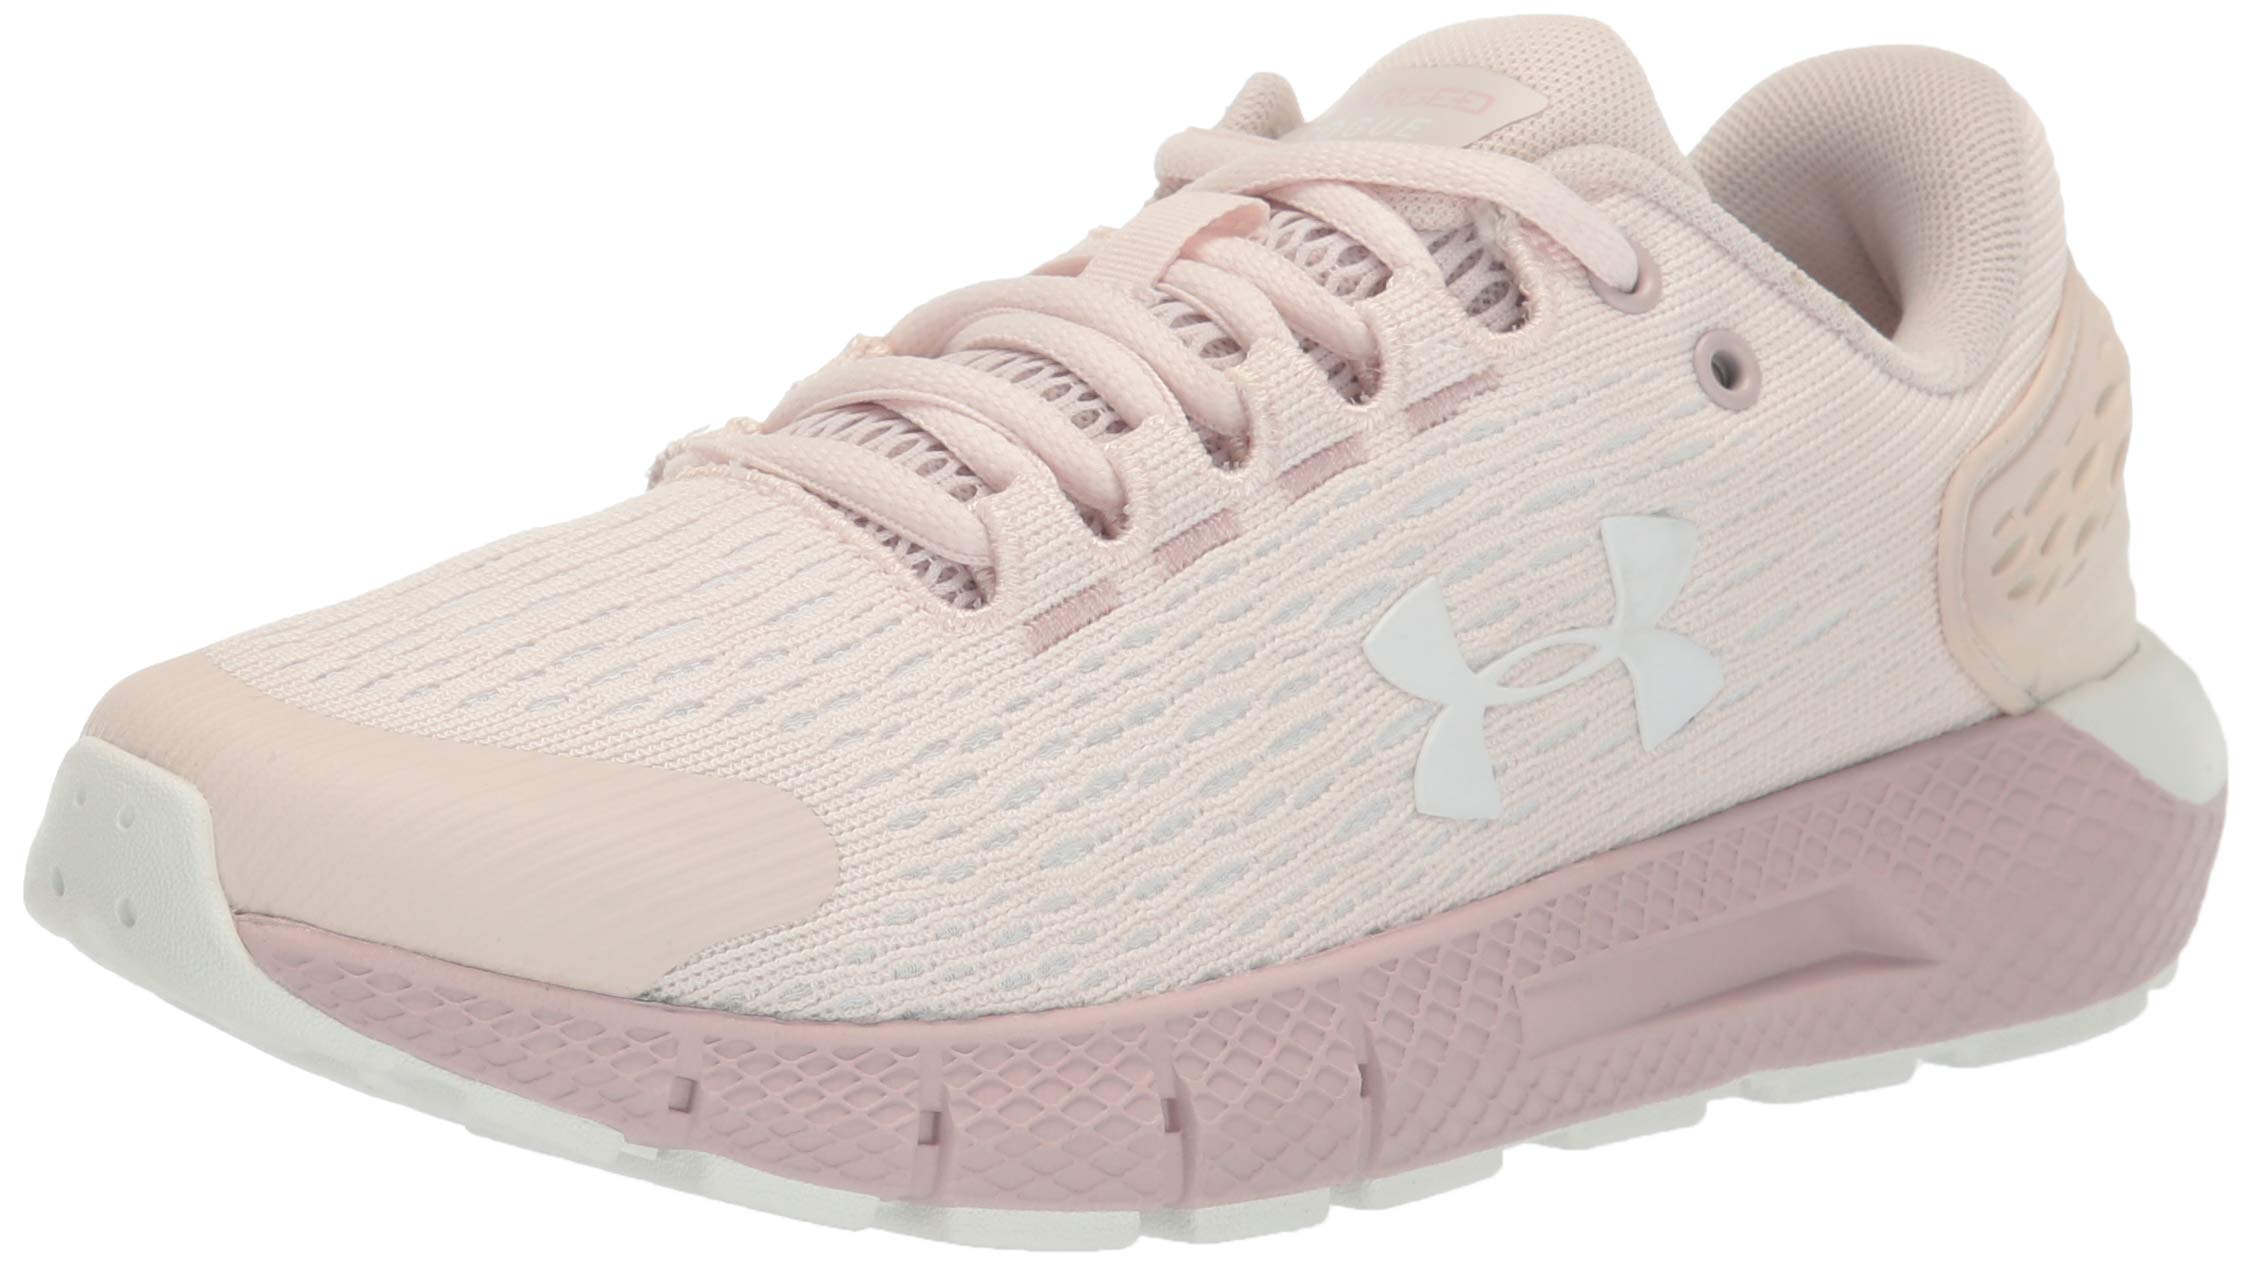 Under Armour + Women’s Charged Rogue 2 Running Shoe